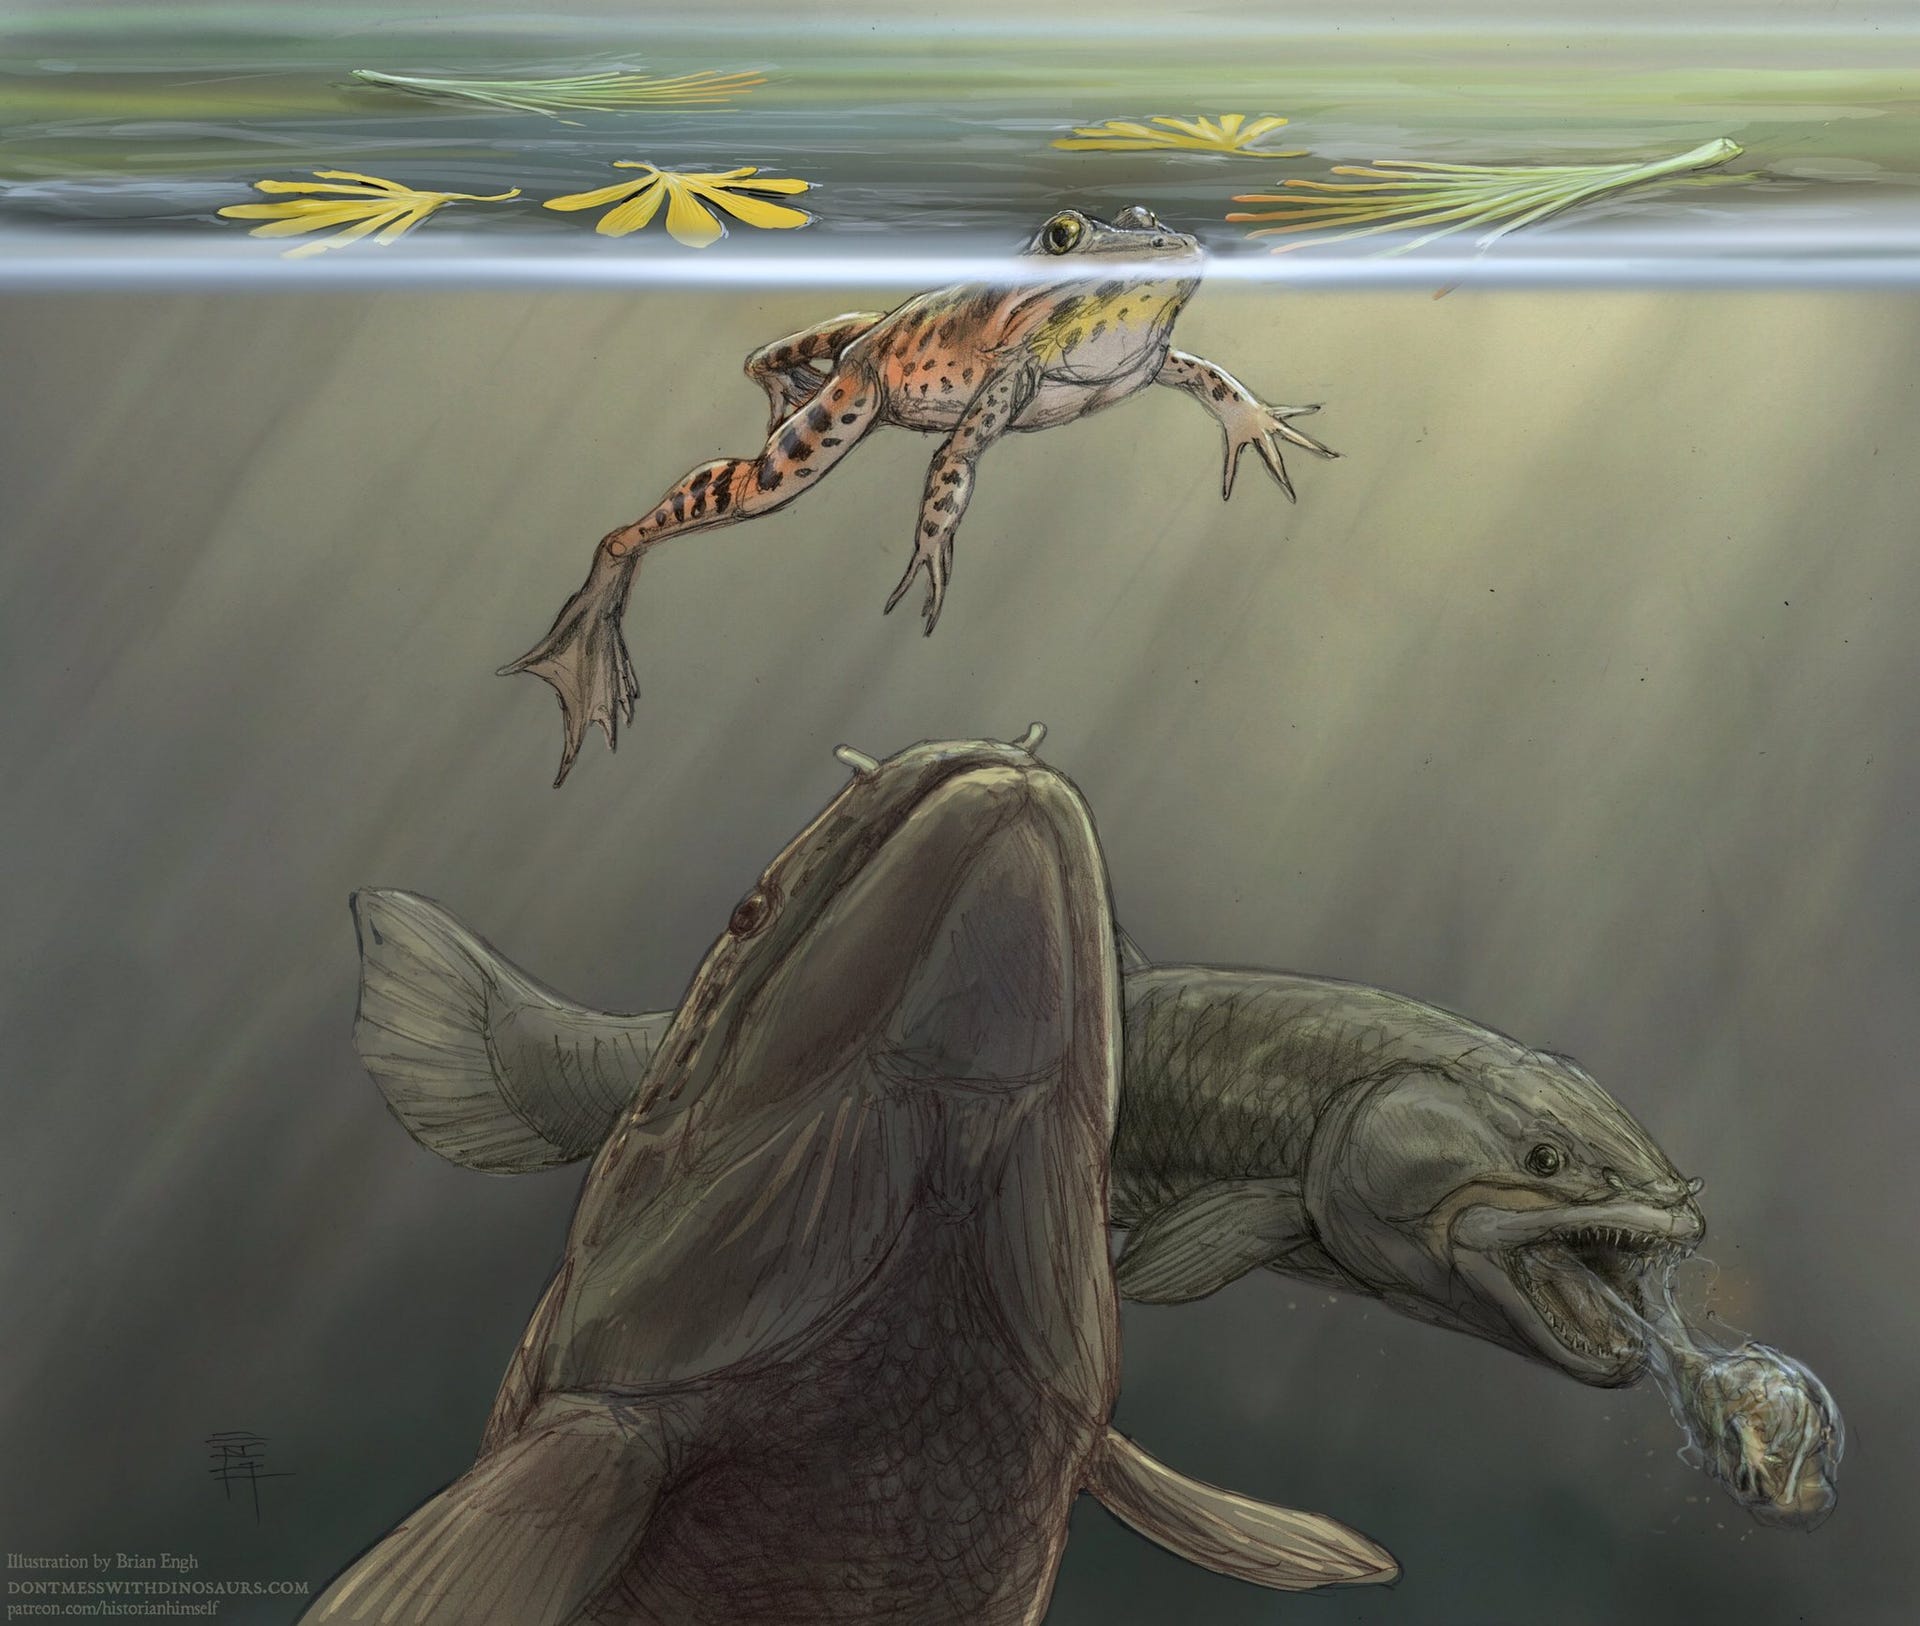 Illustration showing two fish, one of which is looking up at a swimming frog and the other of which is puking.